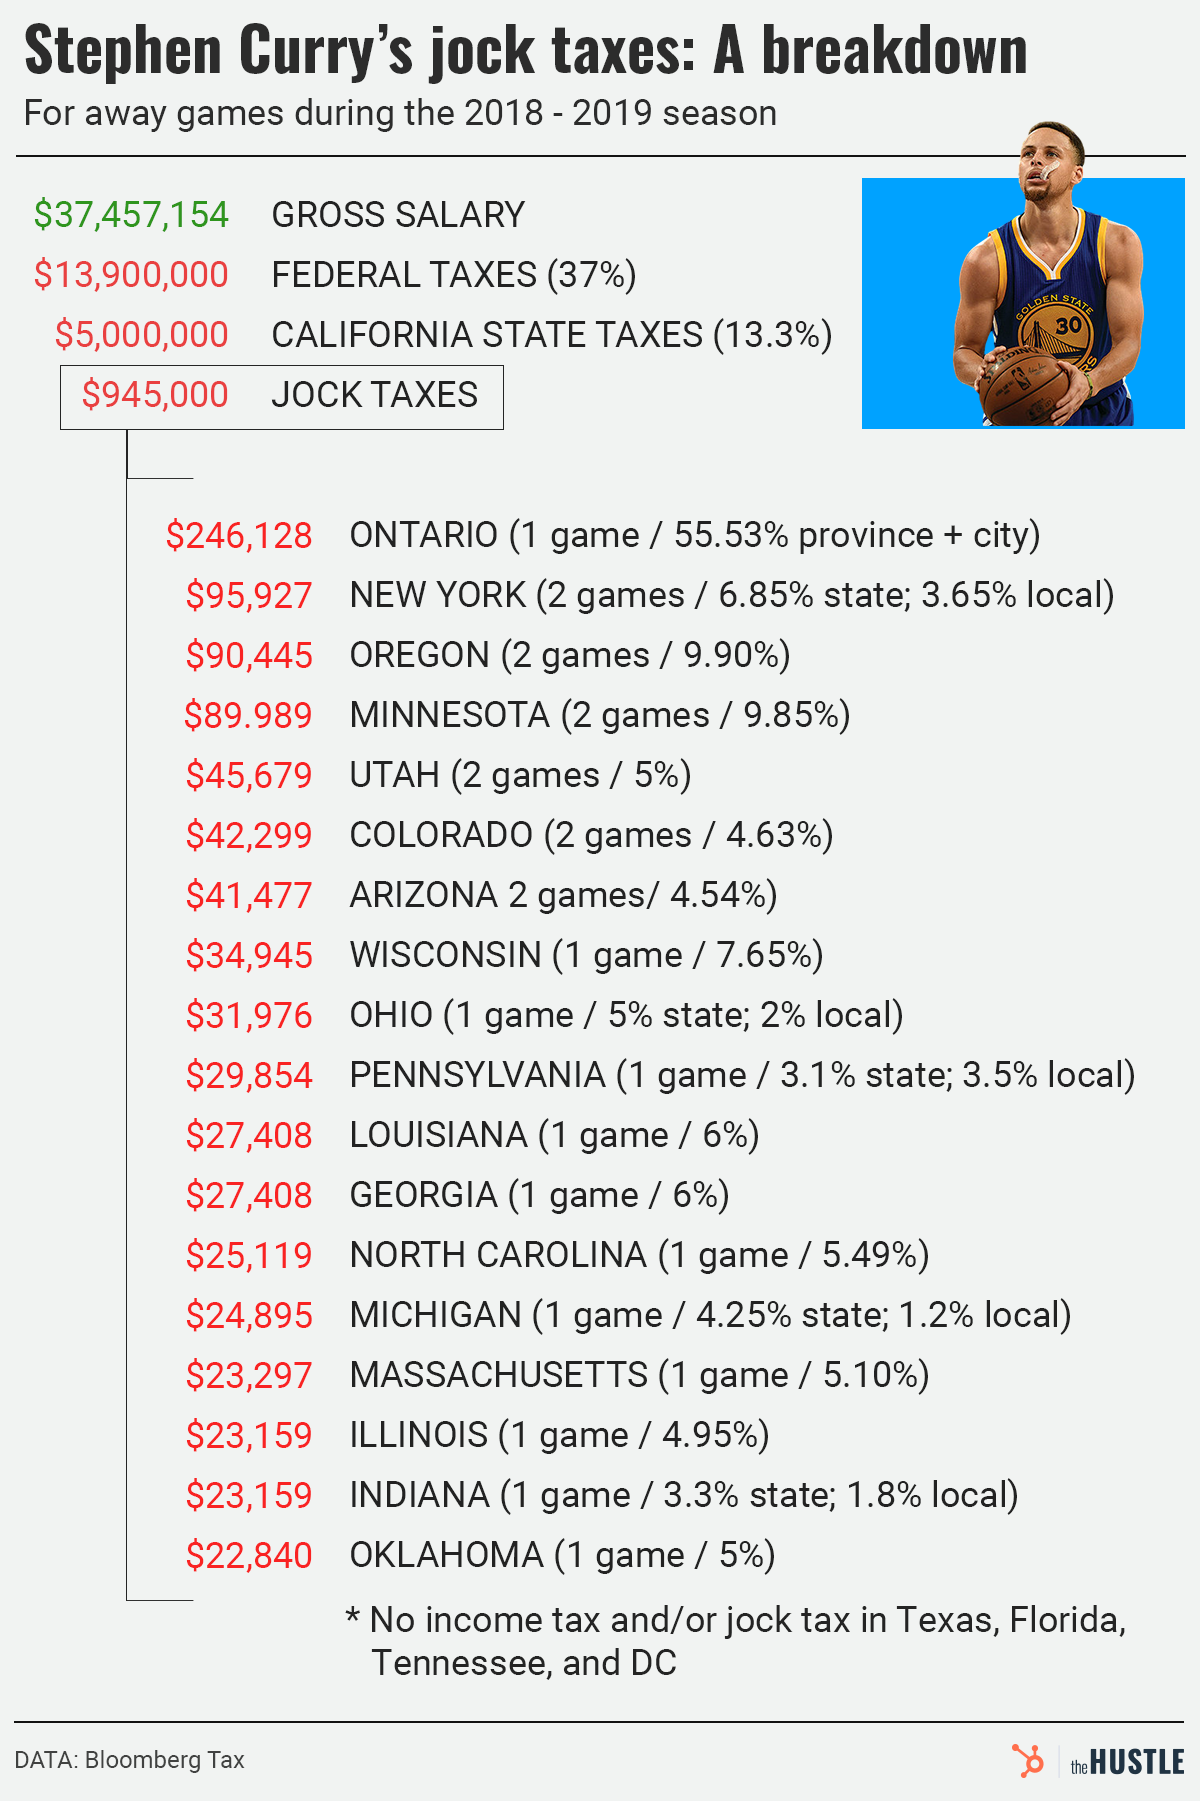 jock taxes by state